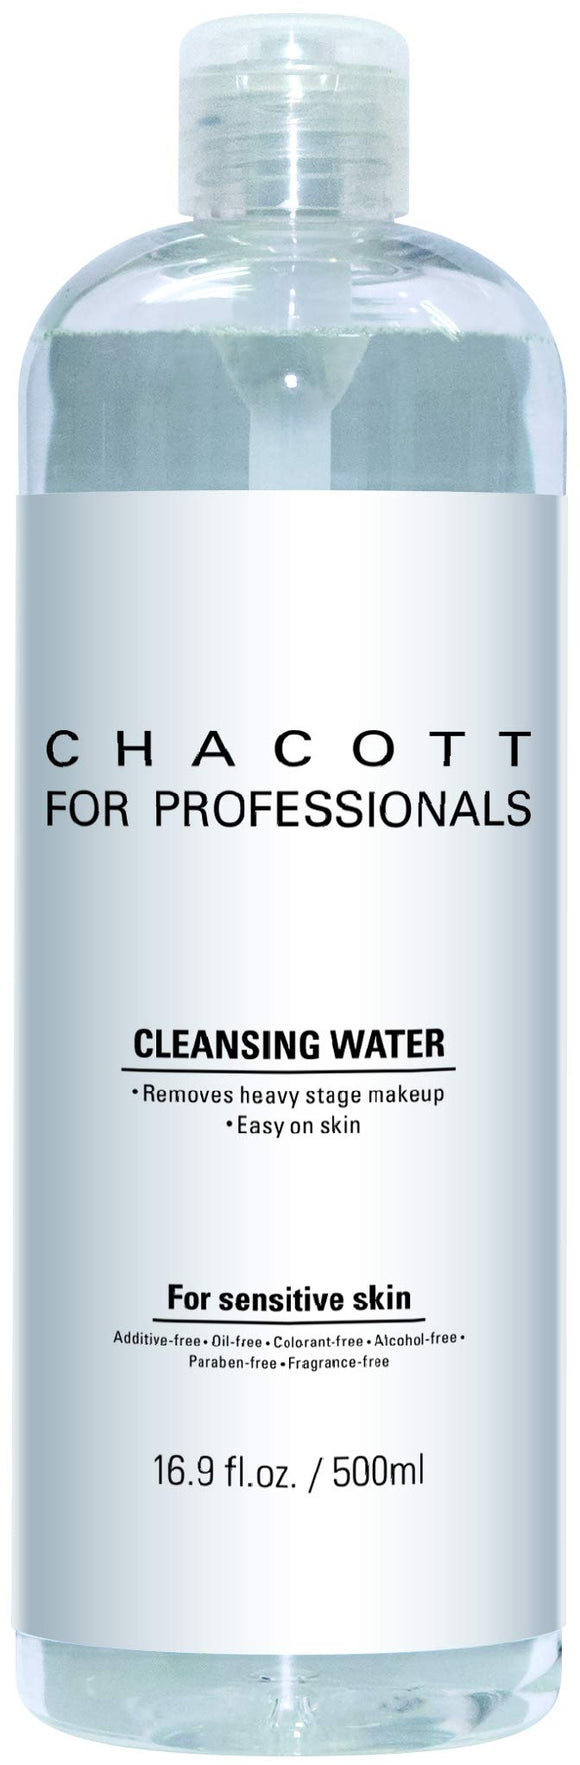 Chacott for professionals cleansing water 500ml